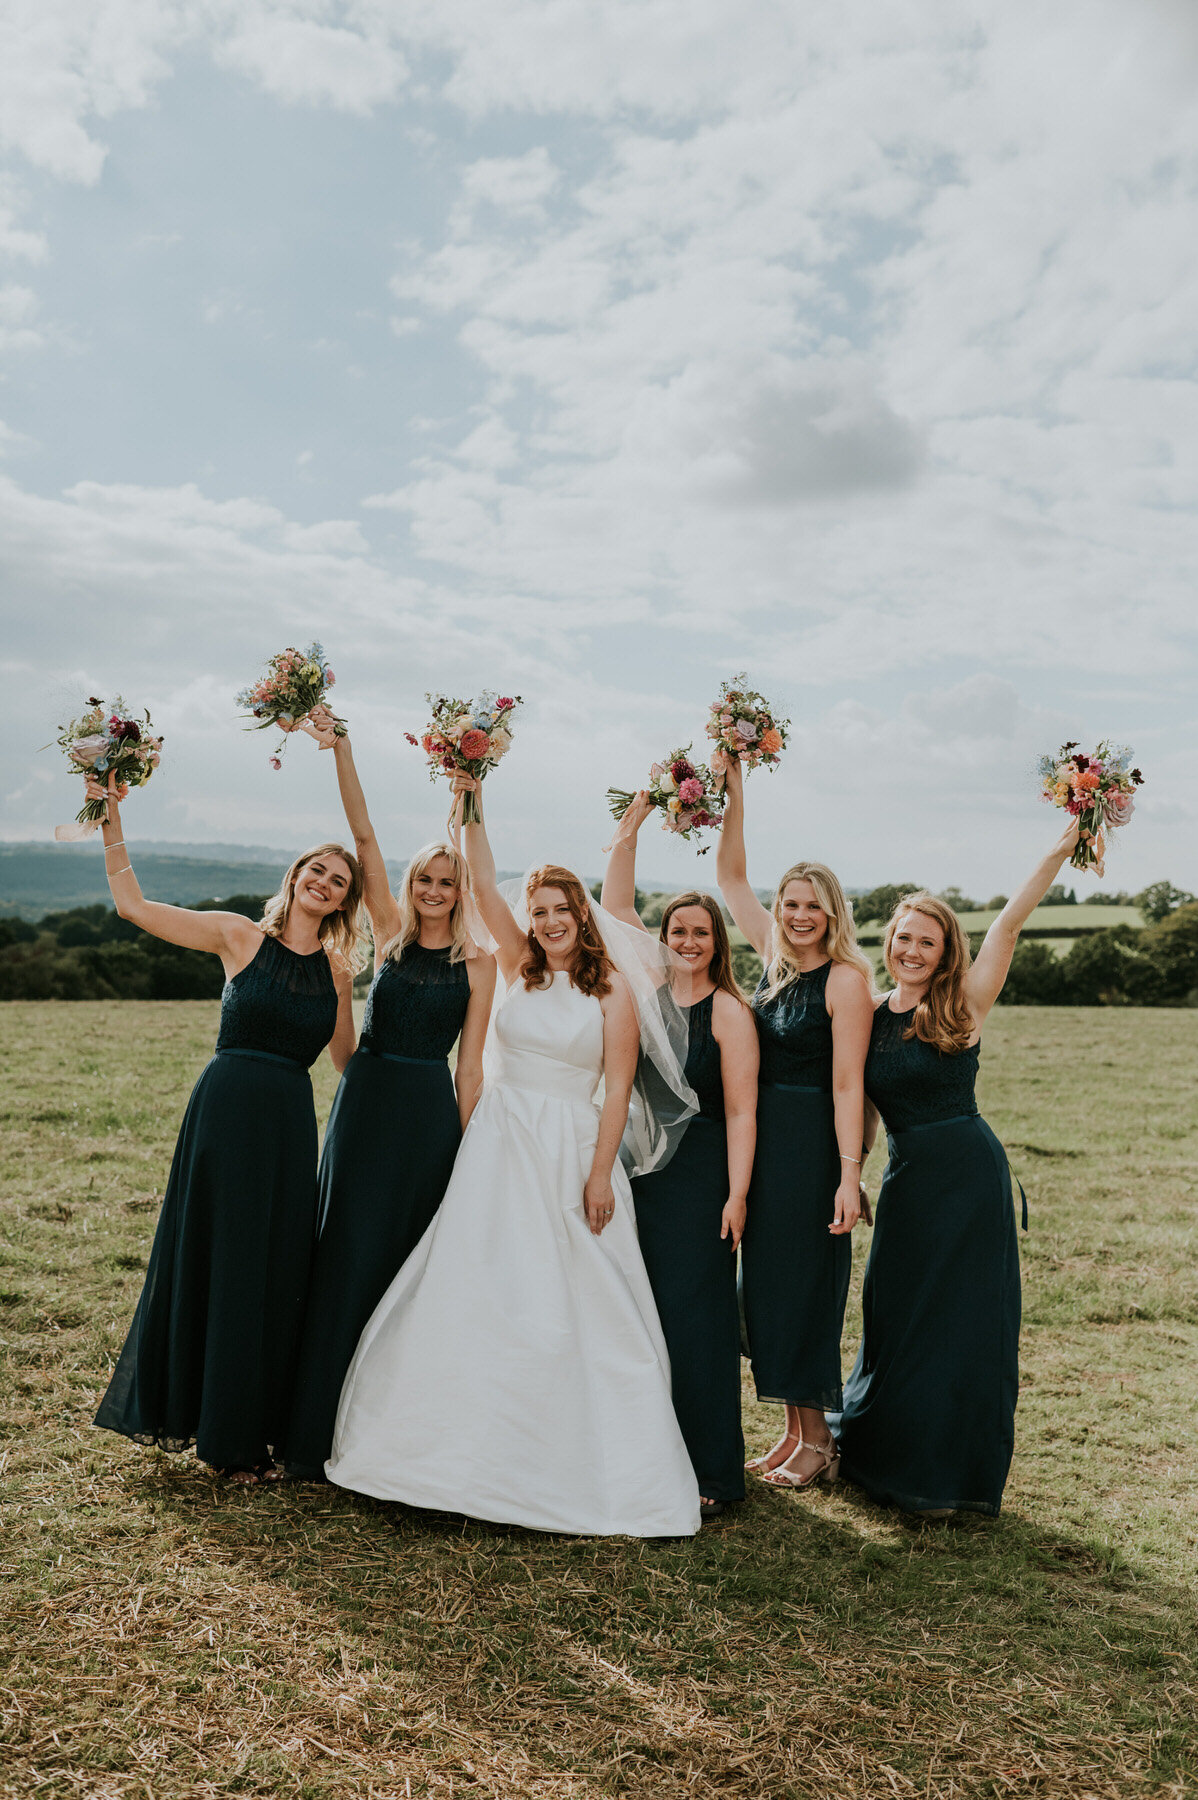 Bride and bridesmaids waving bouquets in air